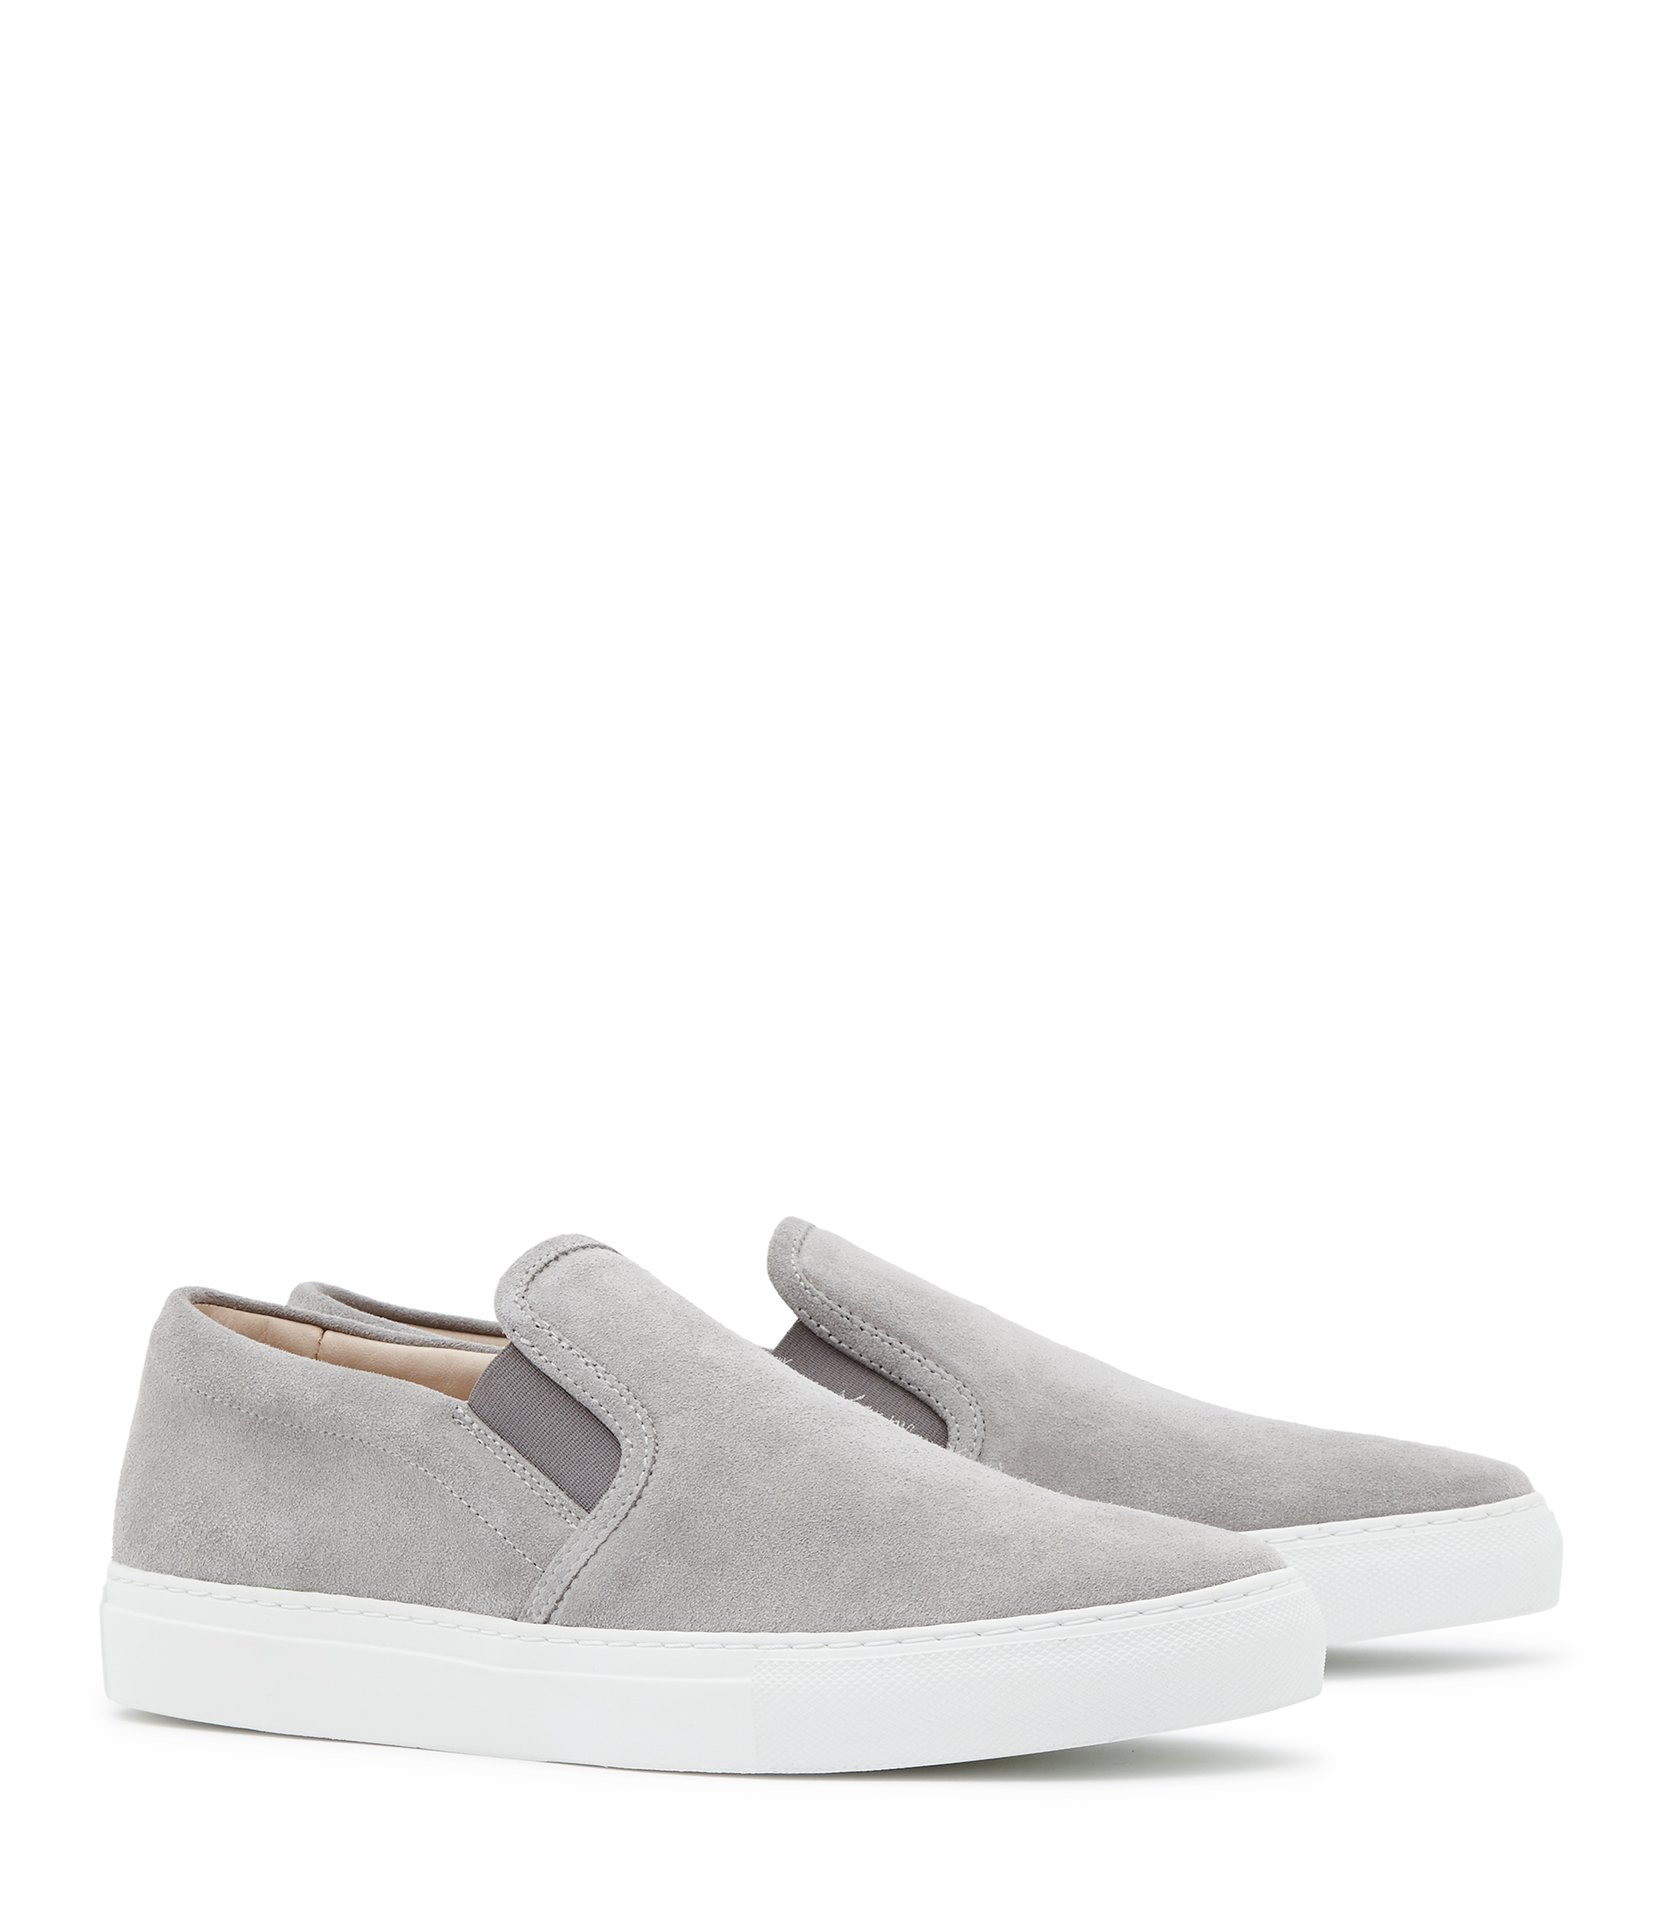 grey slip on shoes cheap online